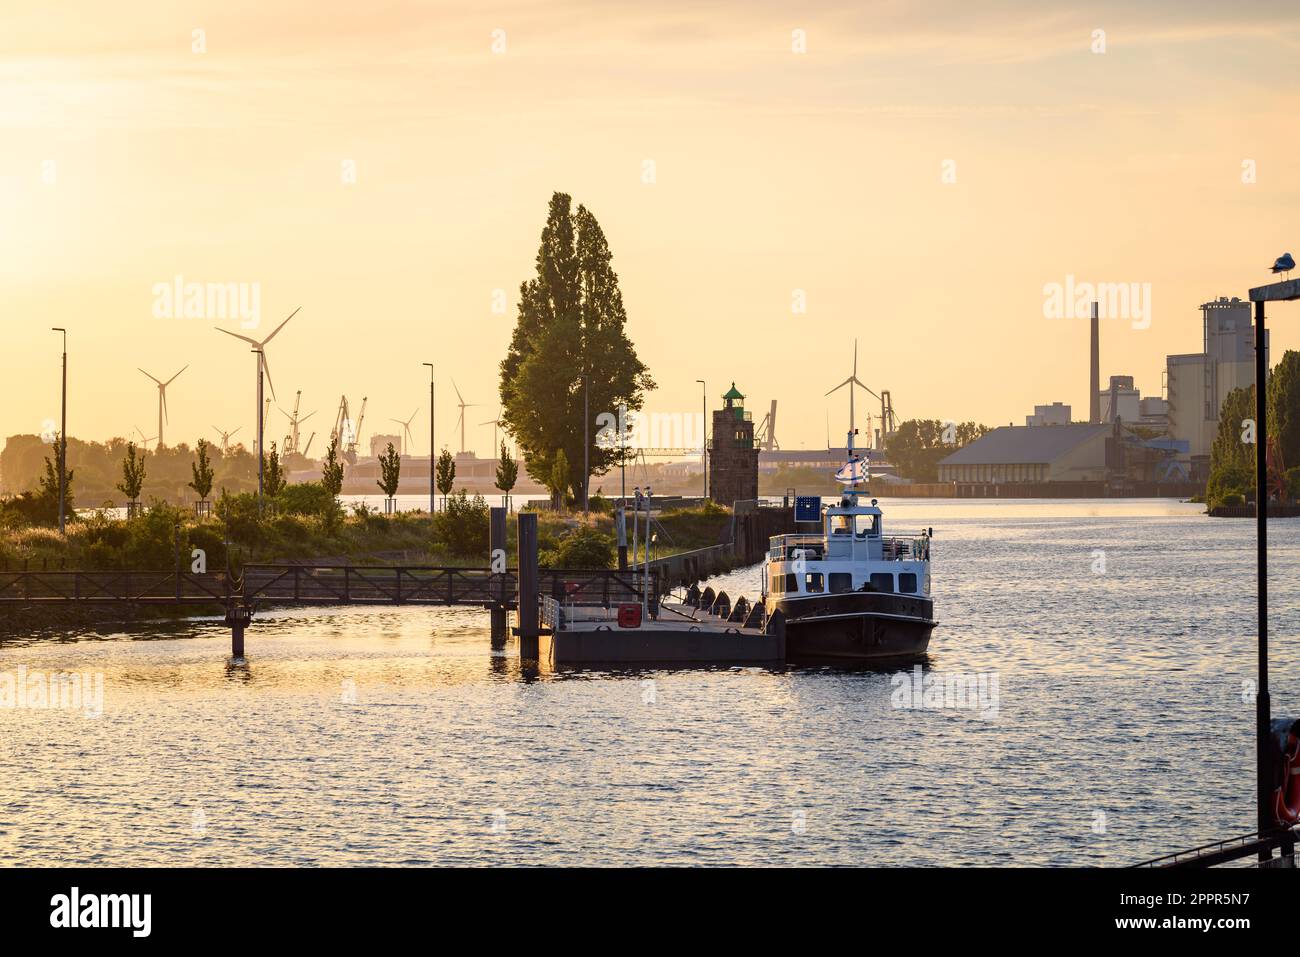 River harbour at sunset in summer. Manufacturing plants and wind turbines along with a lighthouse are visible in background. Stock Photo